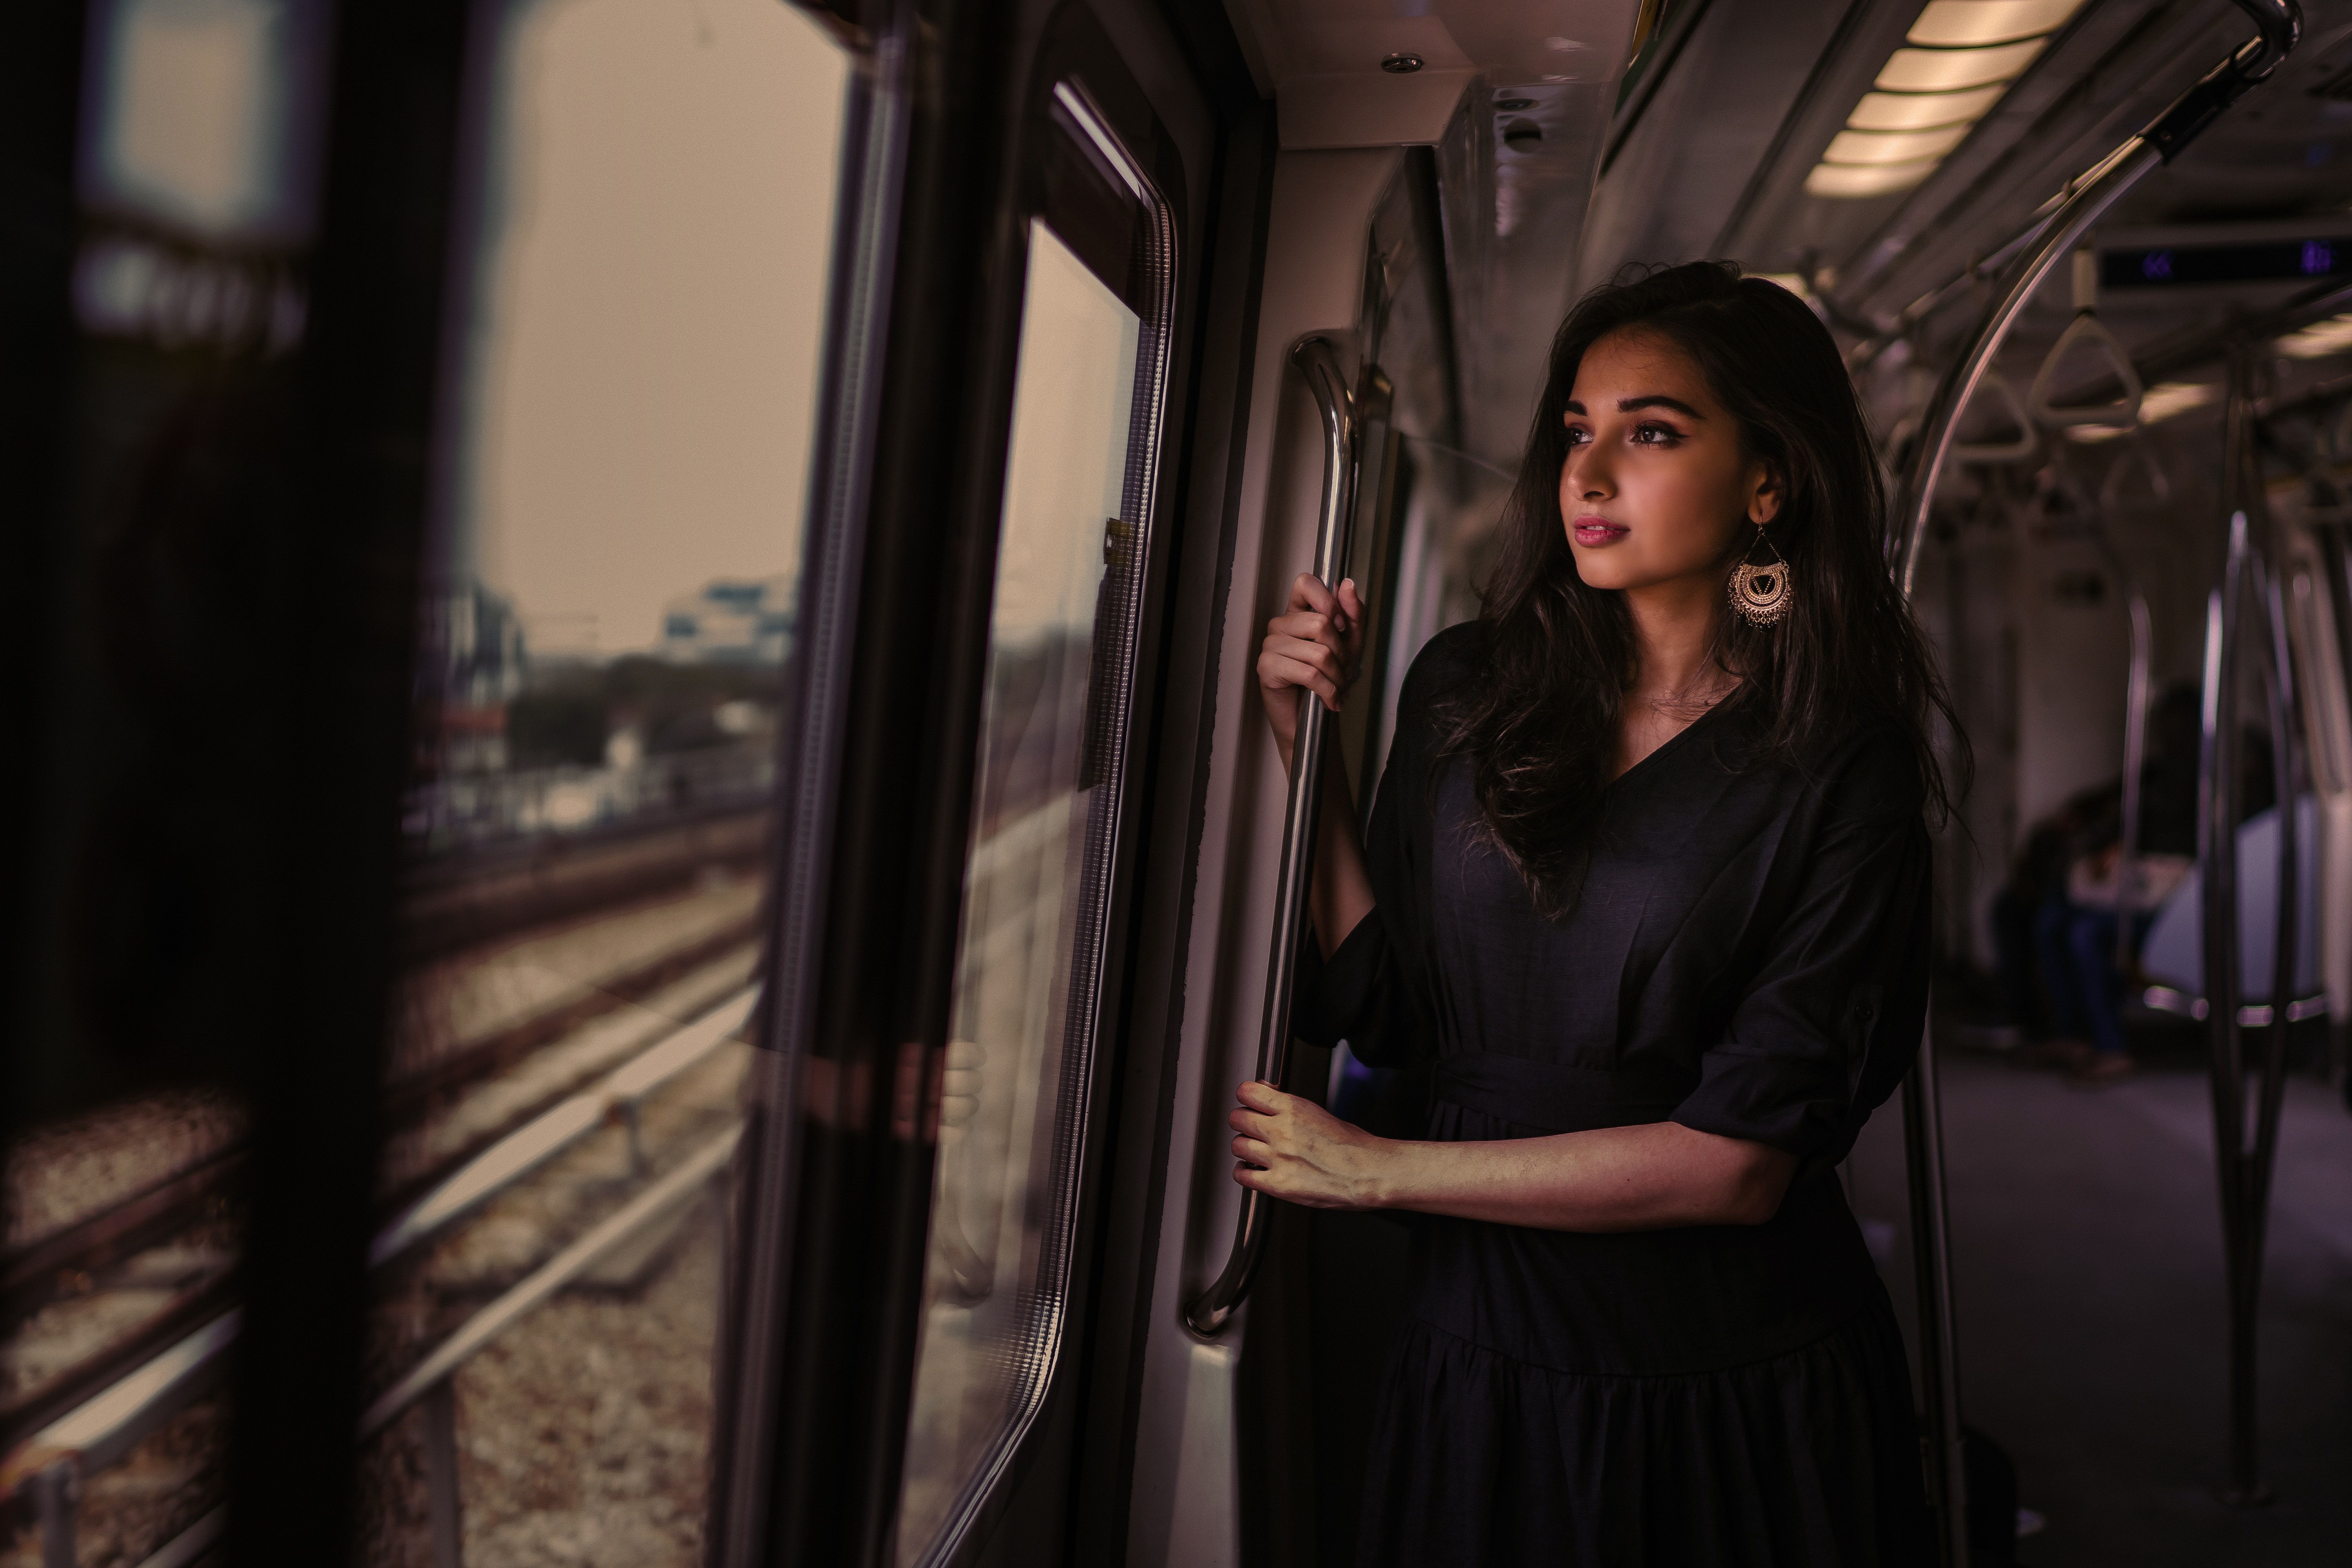 Women Standing In Train Holding Metal Rail While Looking Outside 5k 1440P Resolution HD 4k Wallpaper, Image, Background, Photo and Picture